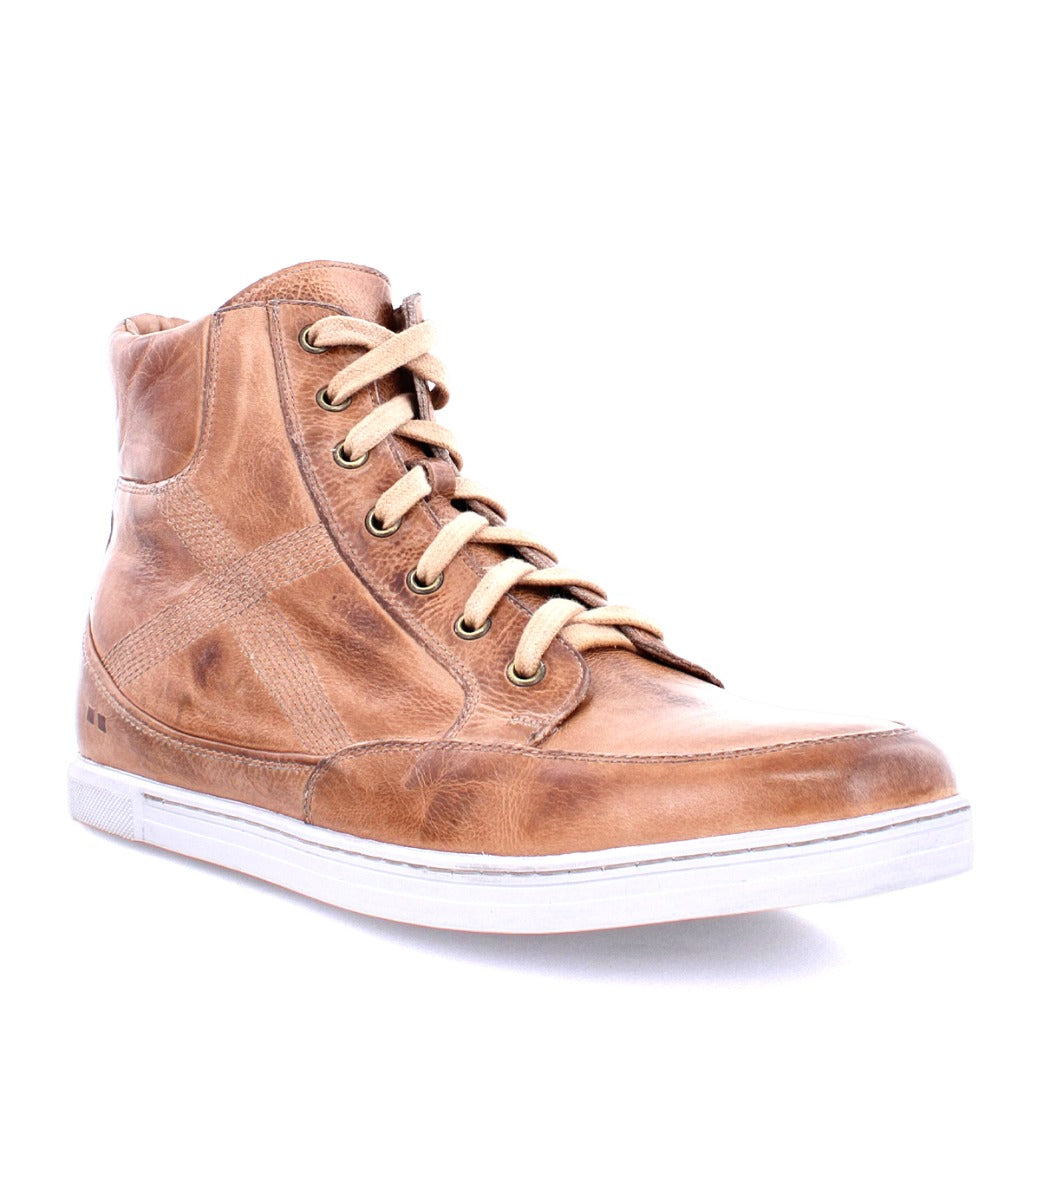 A men's Bed Stu Lordmind brown leather high top sneaker.